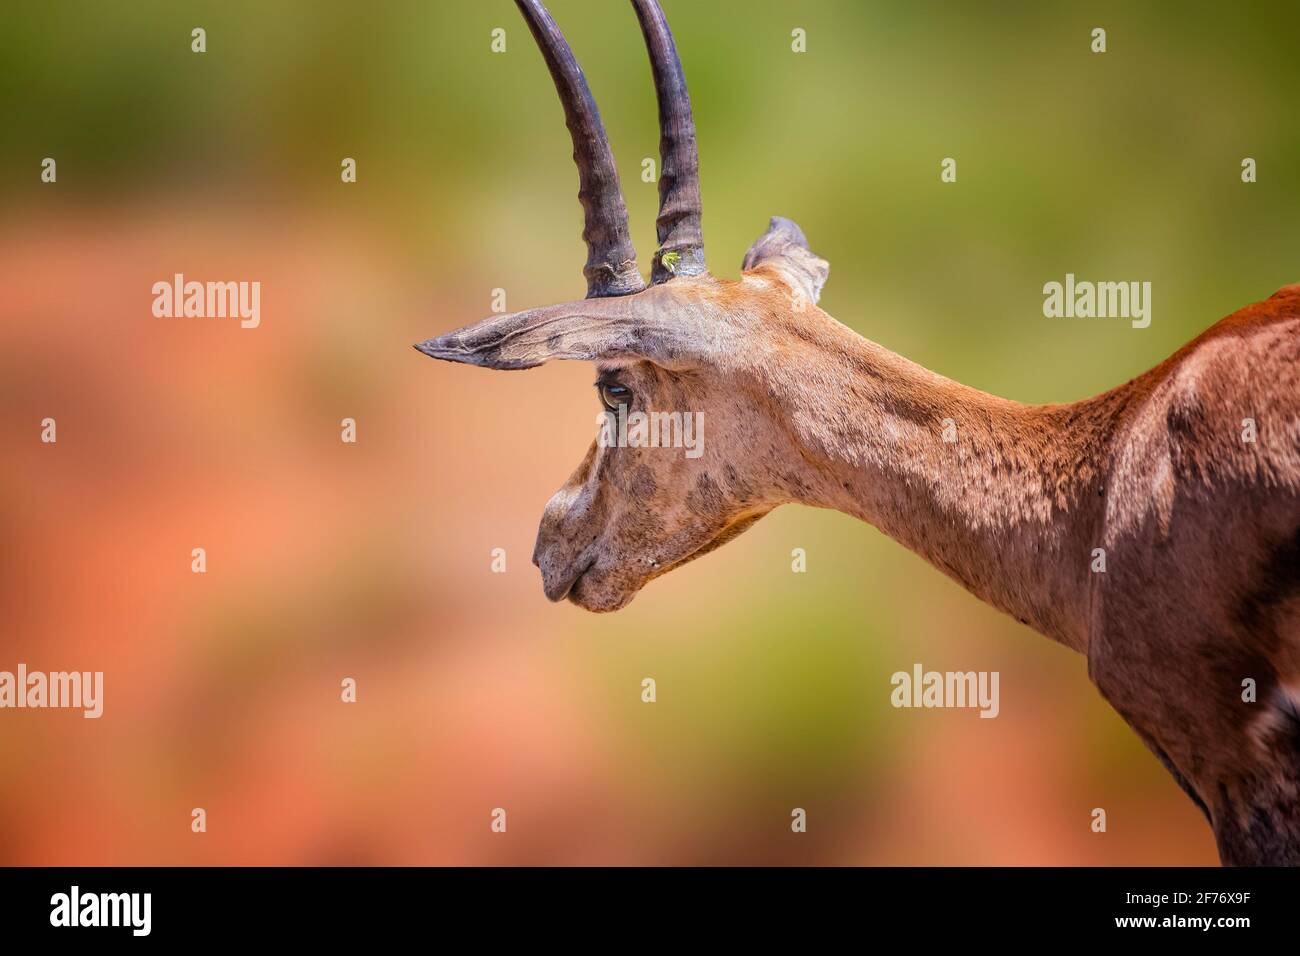 Close up photo of antelope with big horns stands in the grass and chews in Tsavo East, Kenya. It is a wildlife photo from Africa. Stock Photo